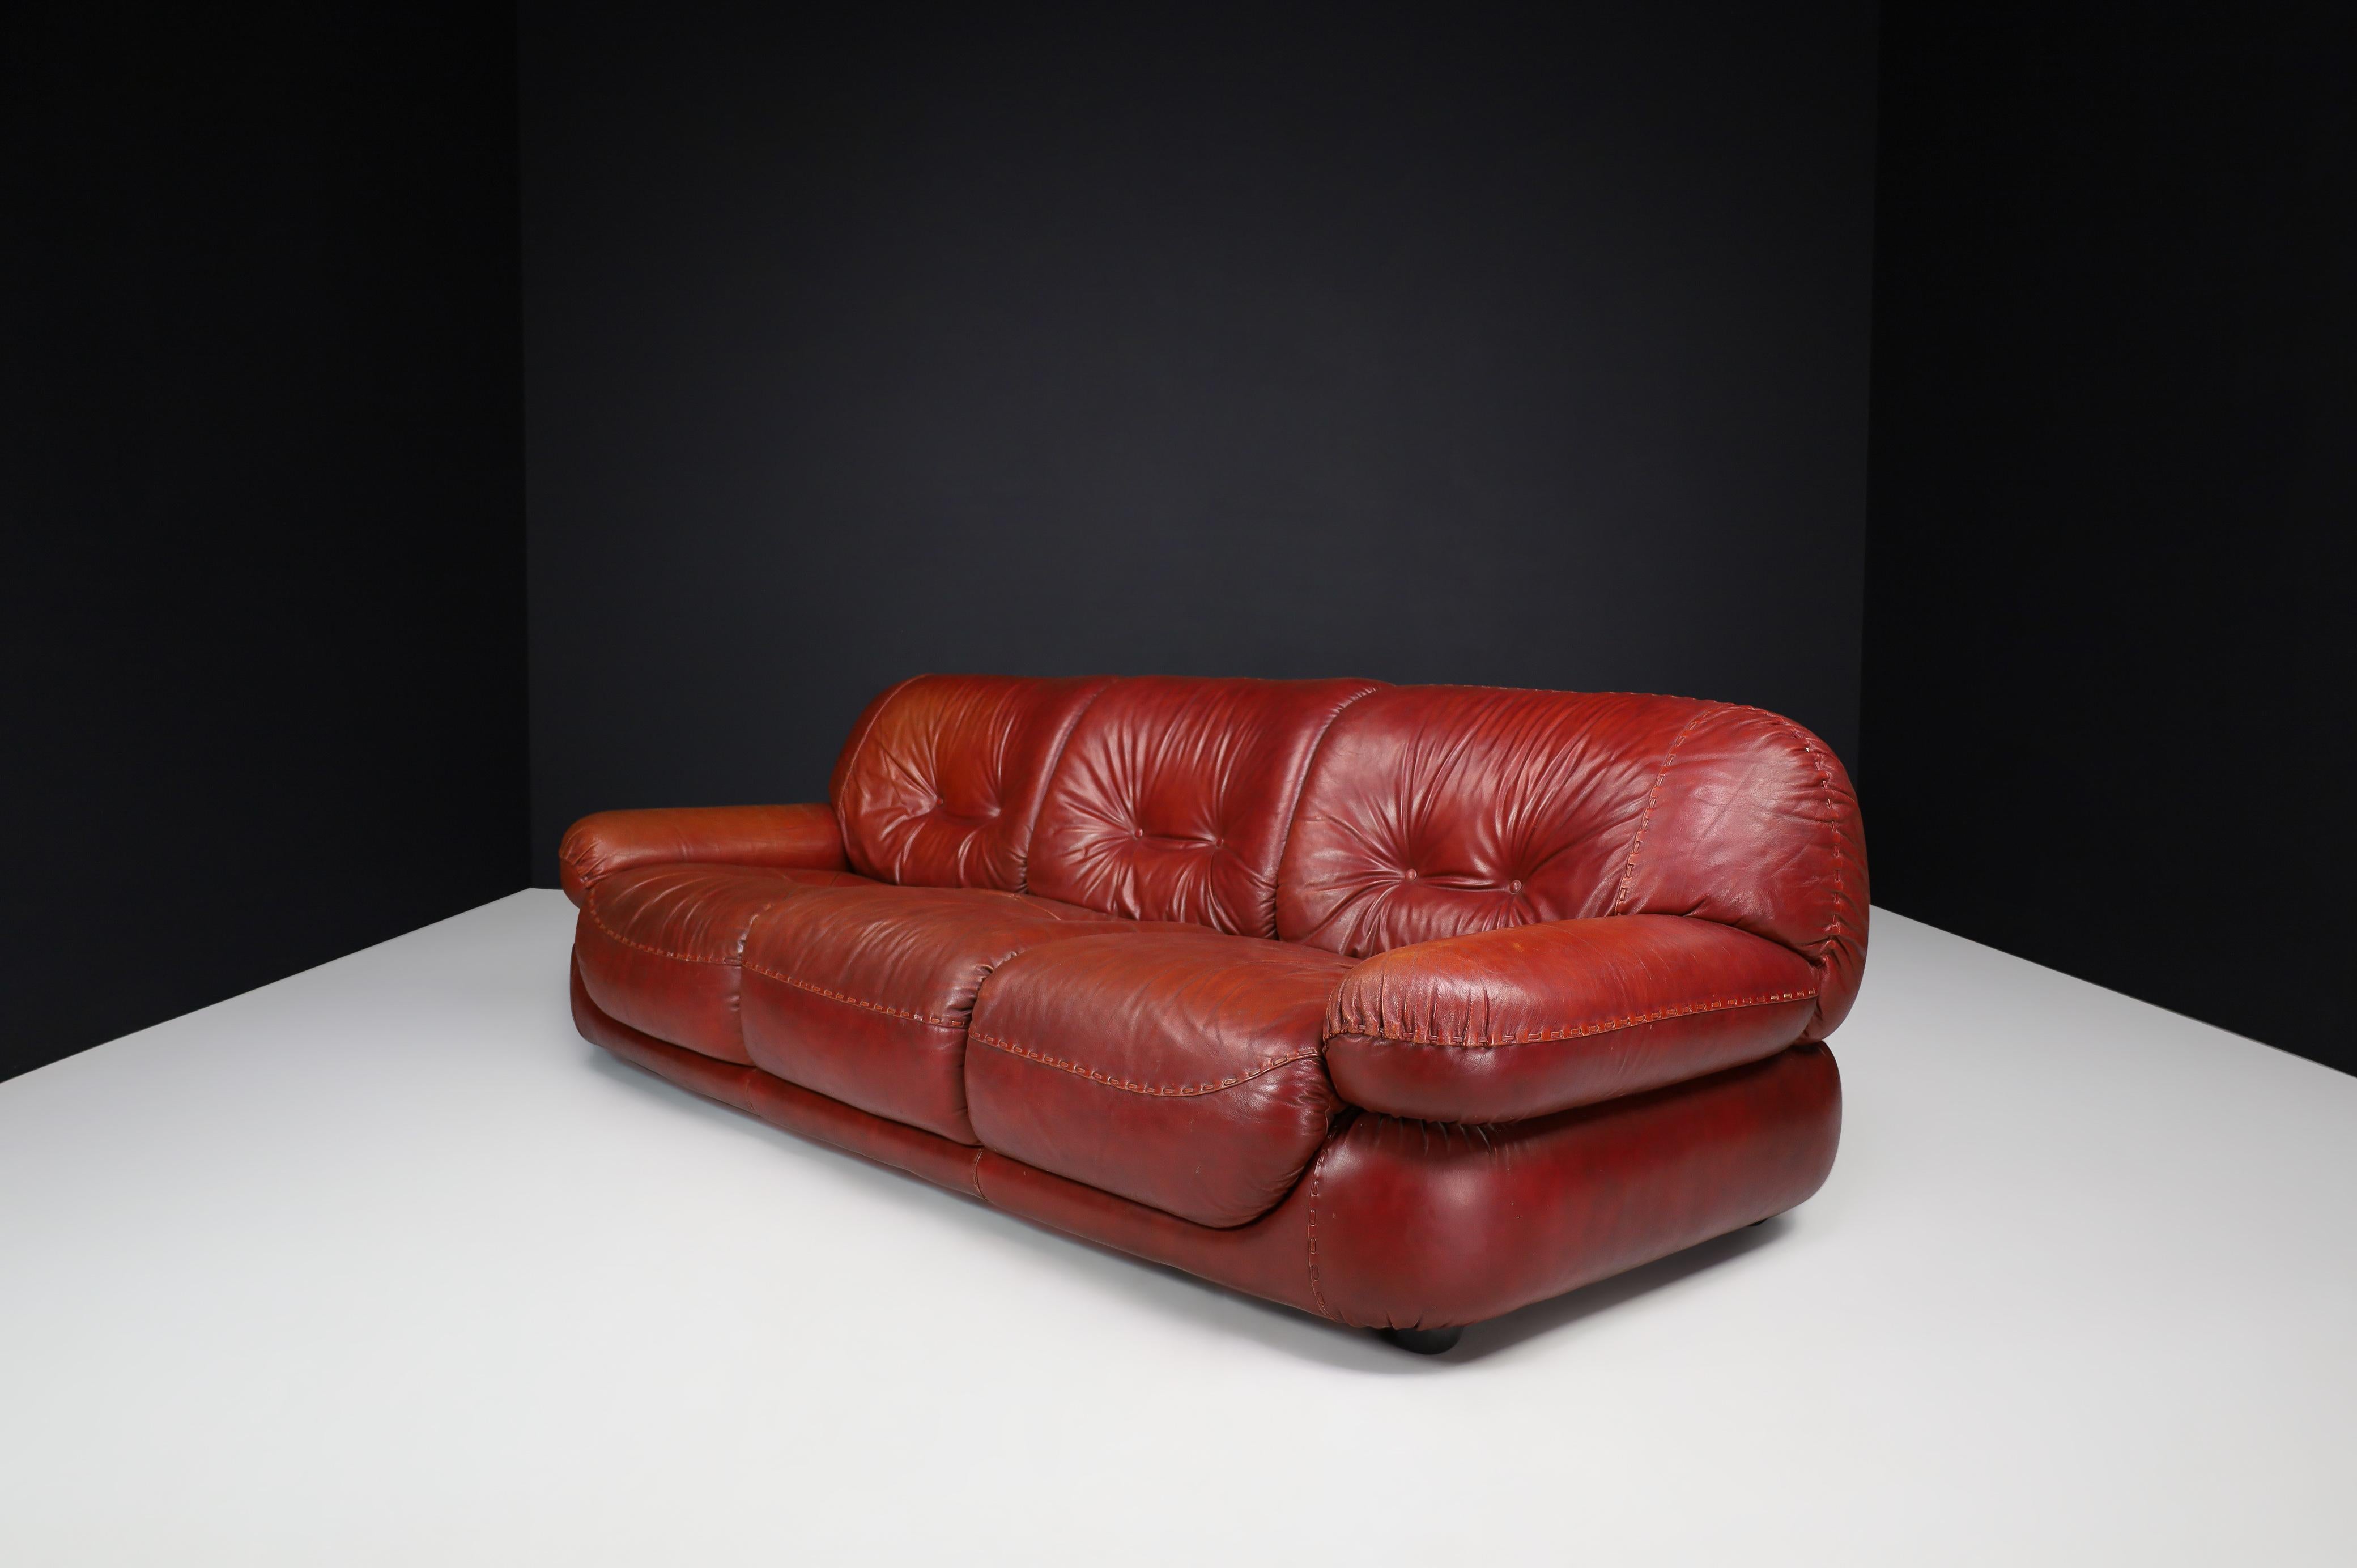 Large lounge sofa in bordeaux red Leather by Sapporo for Mobil Girgi, Italy 1970

A large lounge sofa in leather by Sapporo for Mobil Girgi, Italy, in the 1970s. A large, fluffy, stylish lounge sofa that feature round lines and shapes invite you